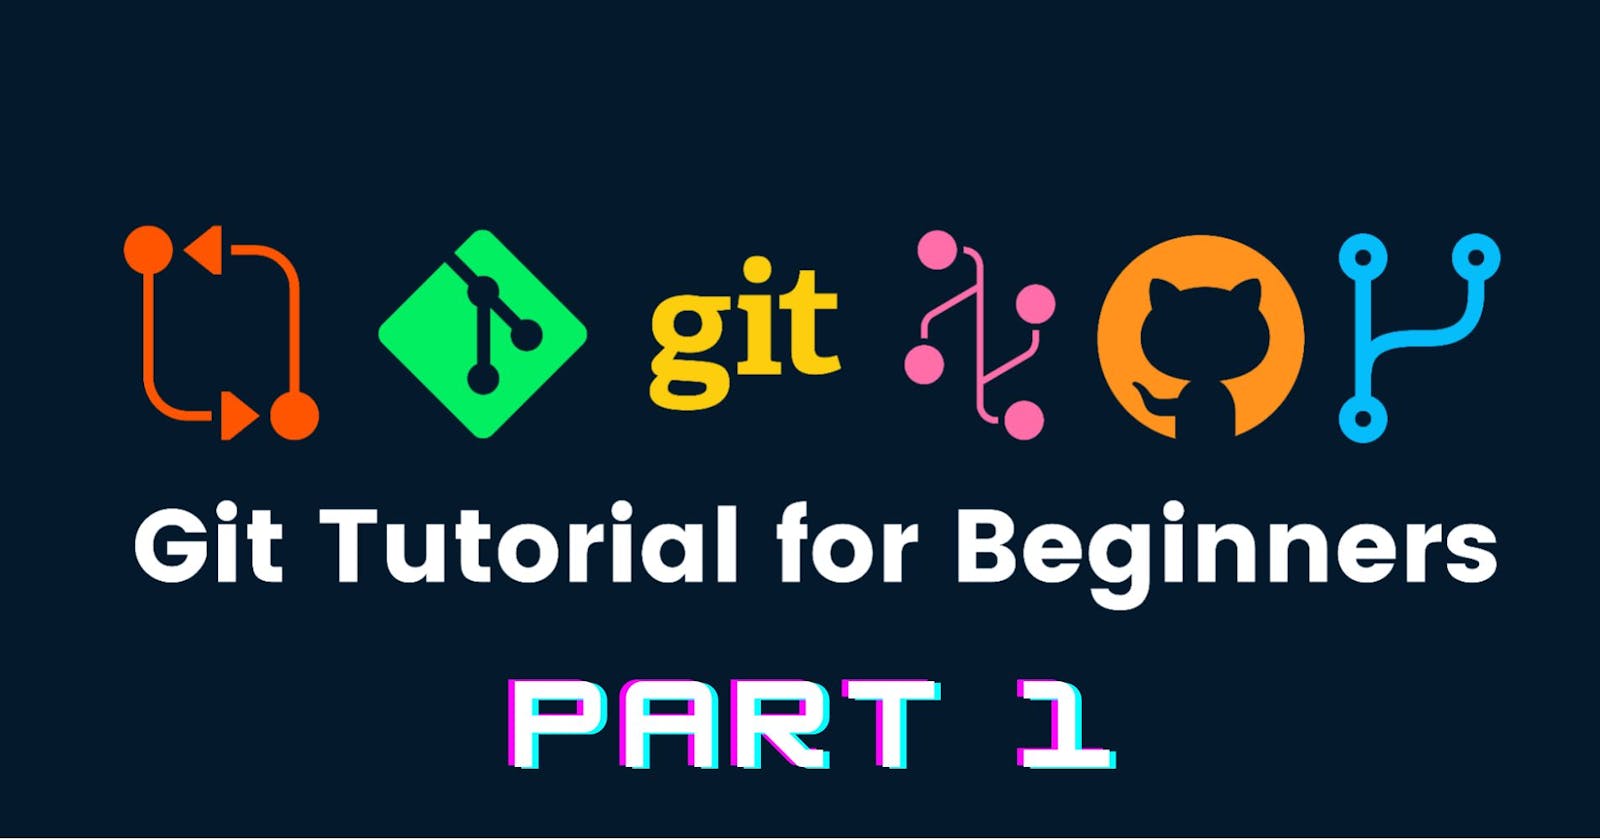 Git & GitHub all you need to know (part 1)